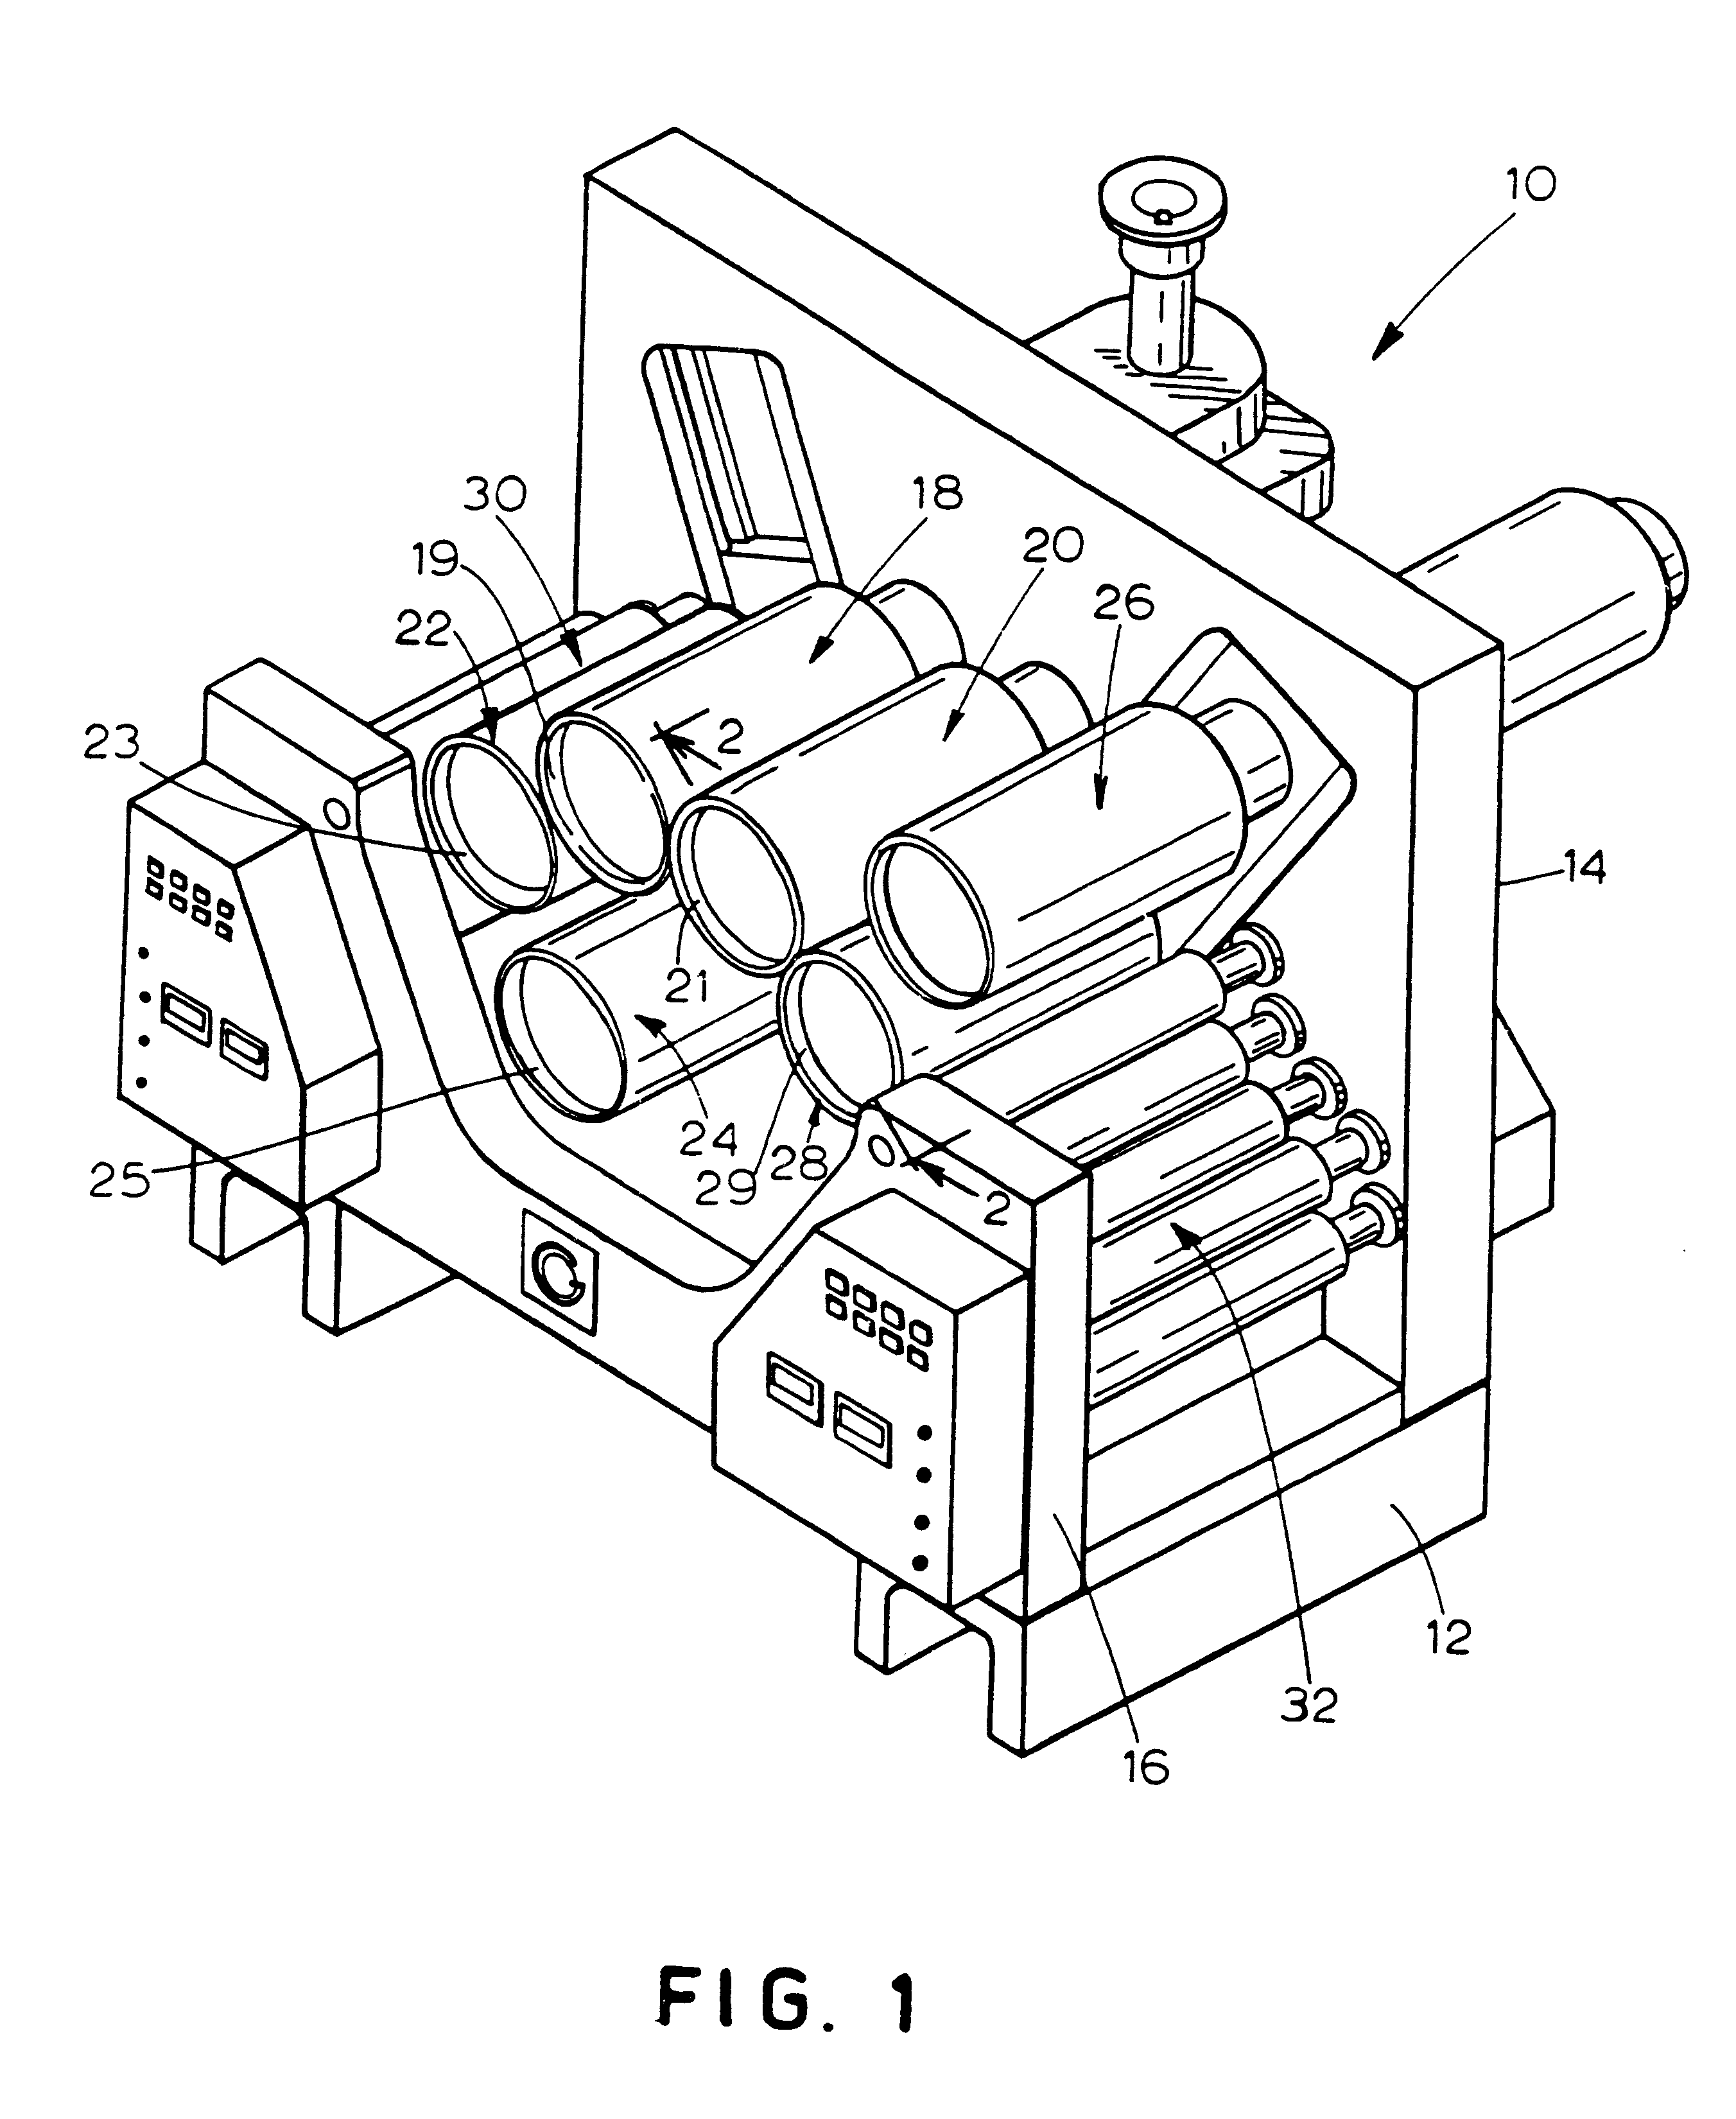 Bearing support system for a printing press having cantilevered cylinders